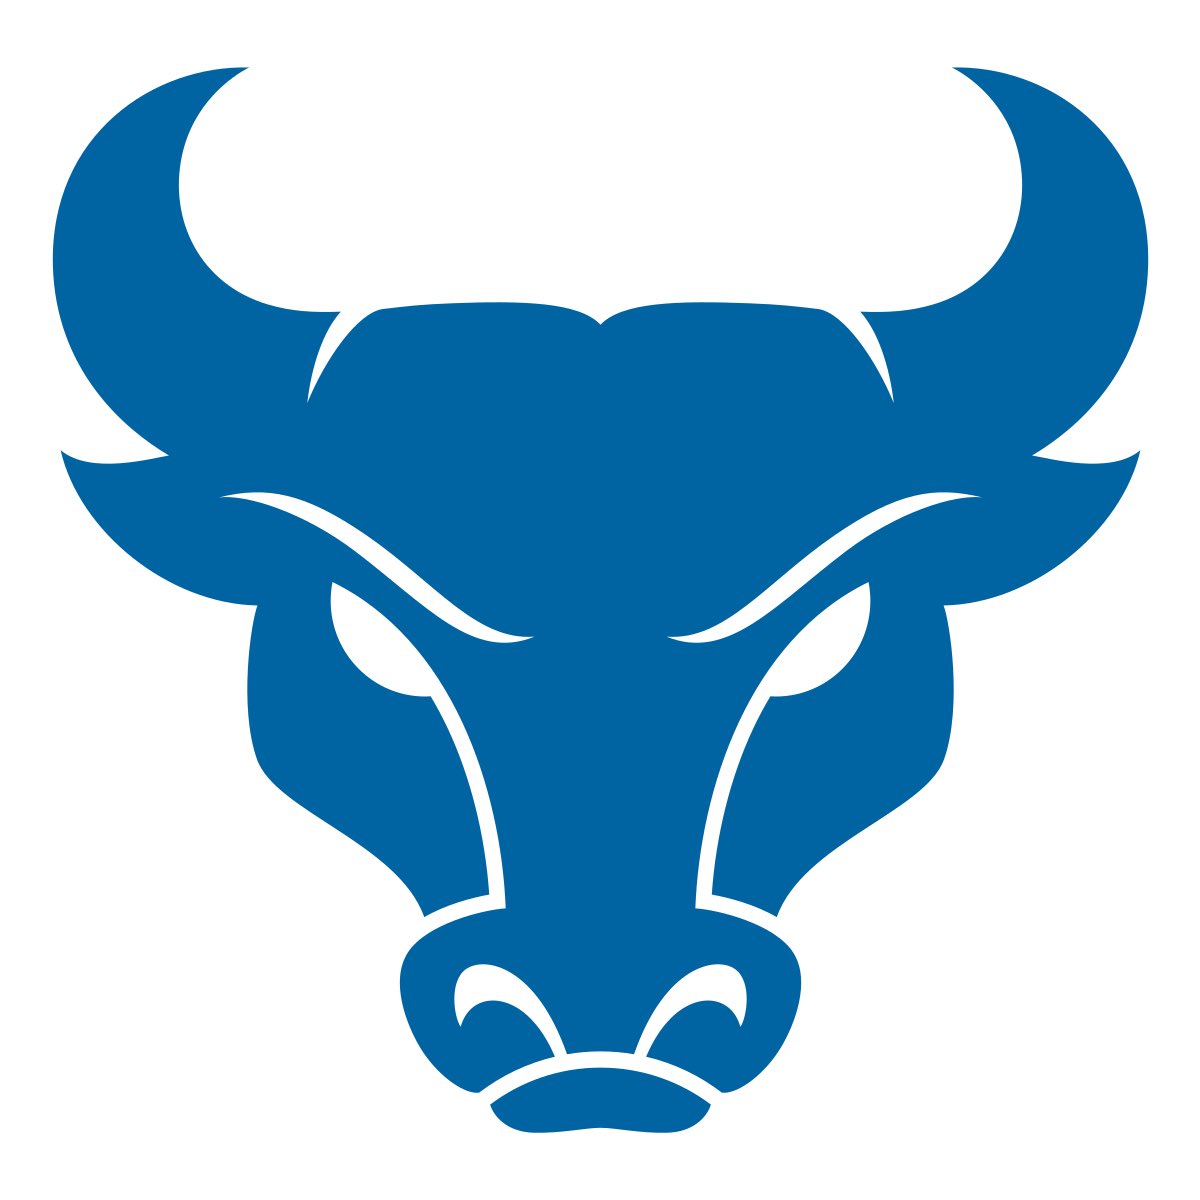 blessed to receive an offer to University of Buffalo. 